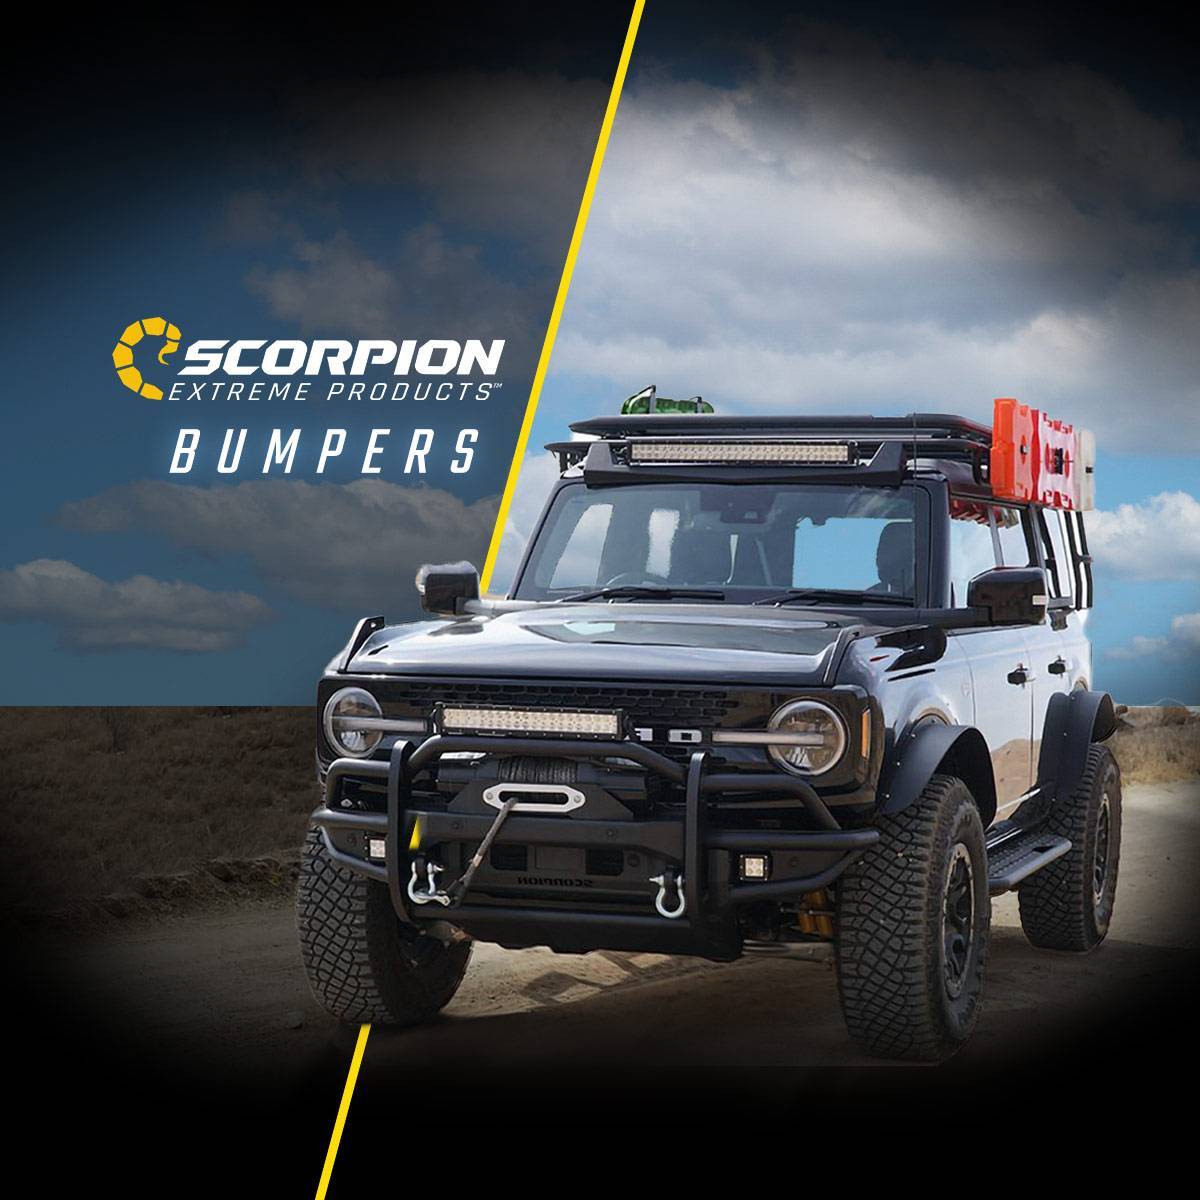 Scorpion Extreme Bumpers